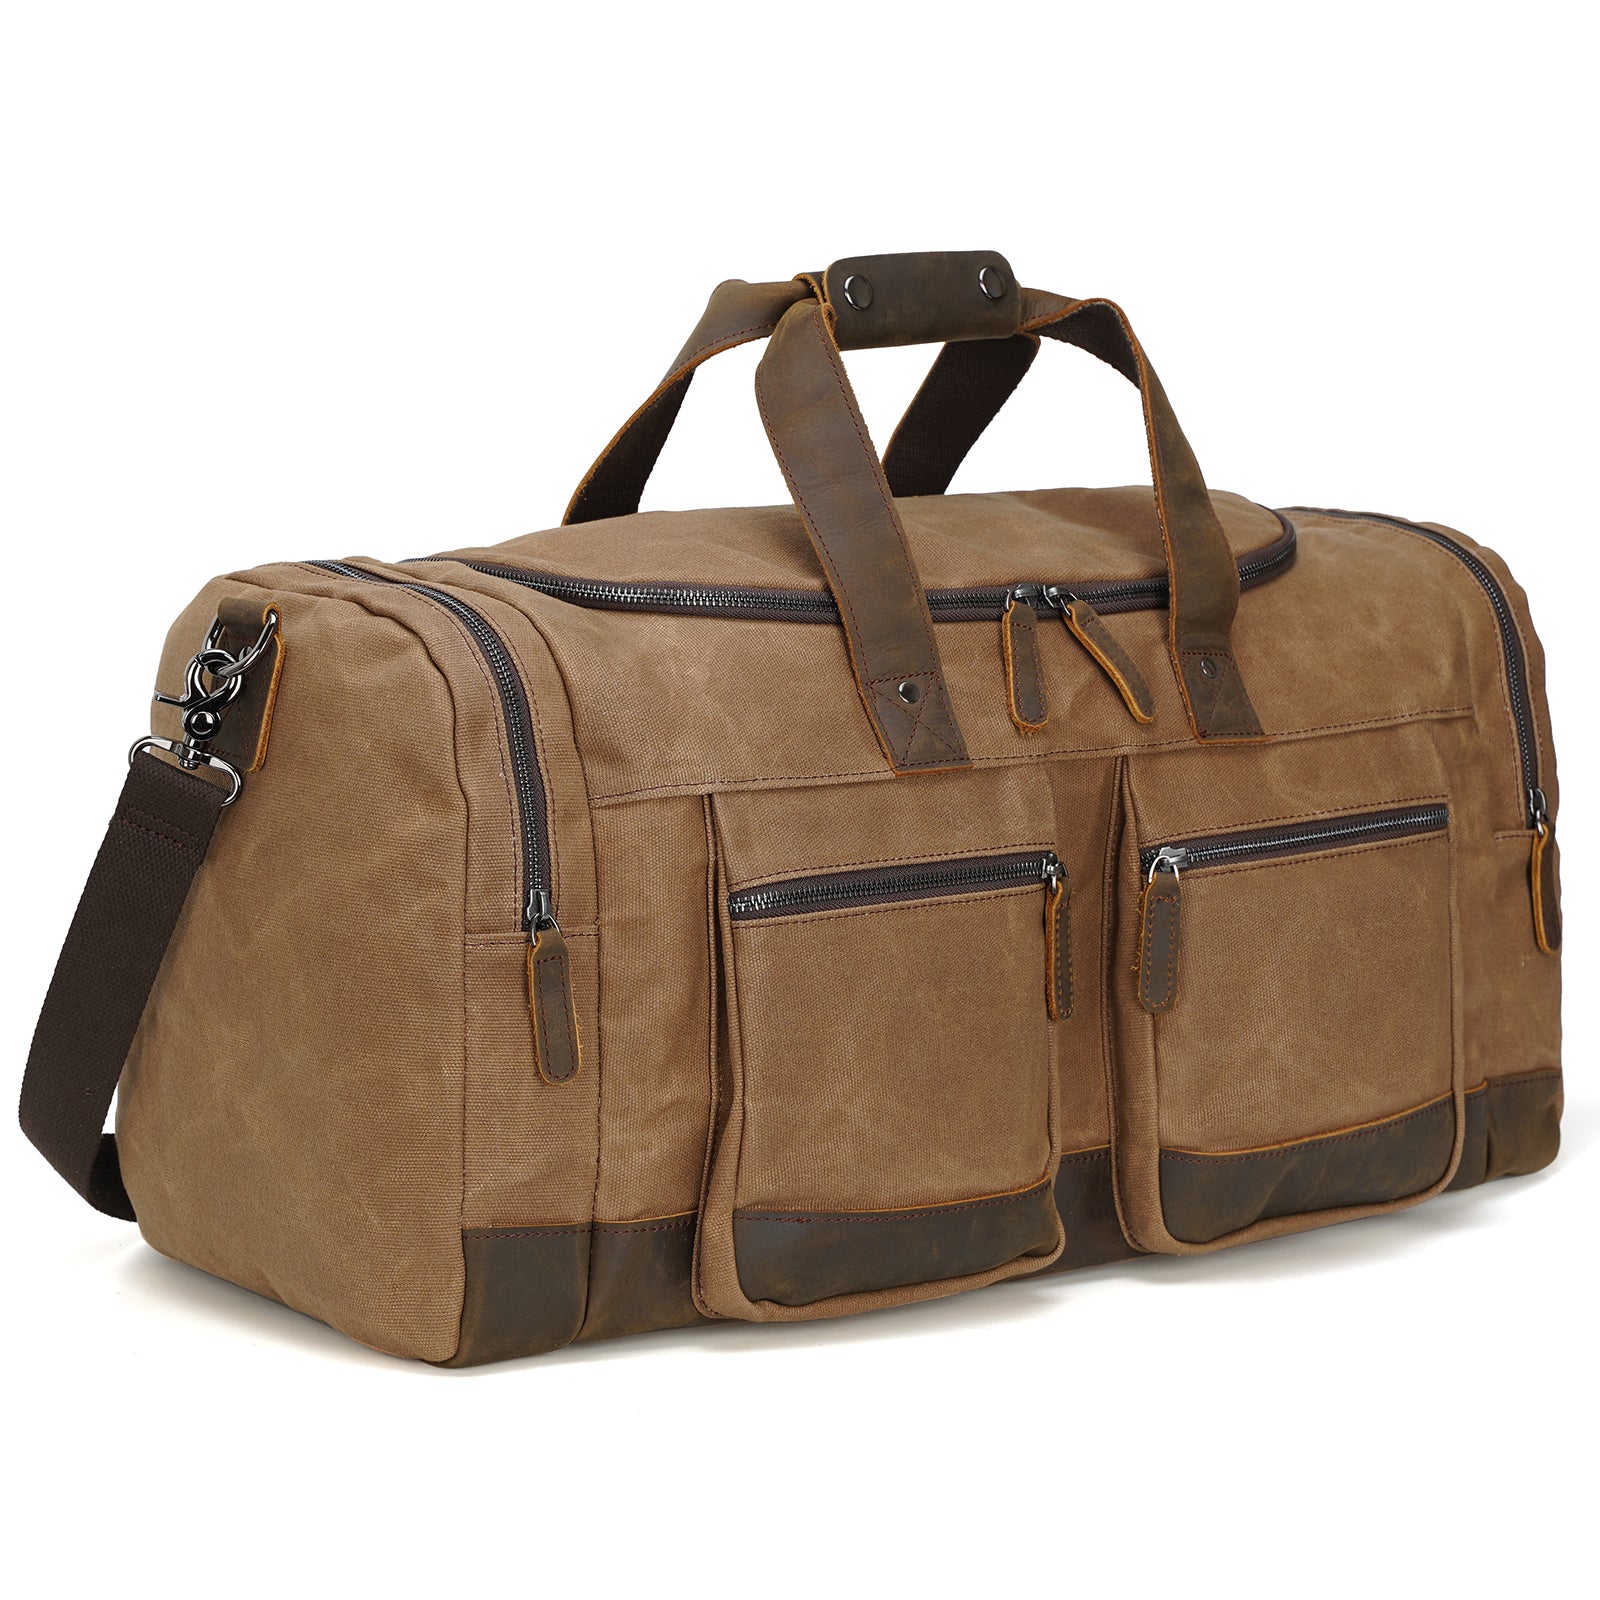 Polare 23” Waxed Canvas Cowhide Leather Waterproof Travel Duffel Bag T